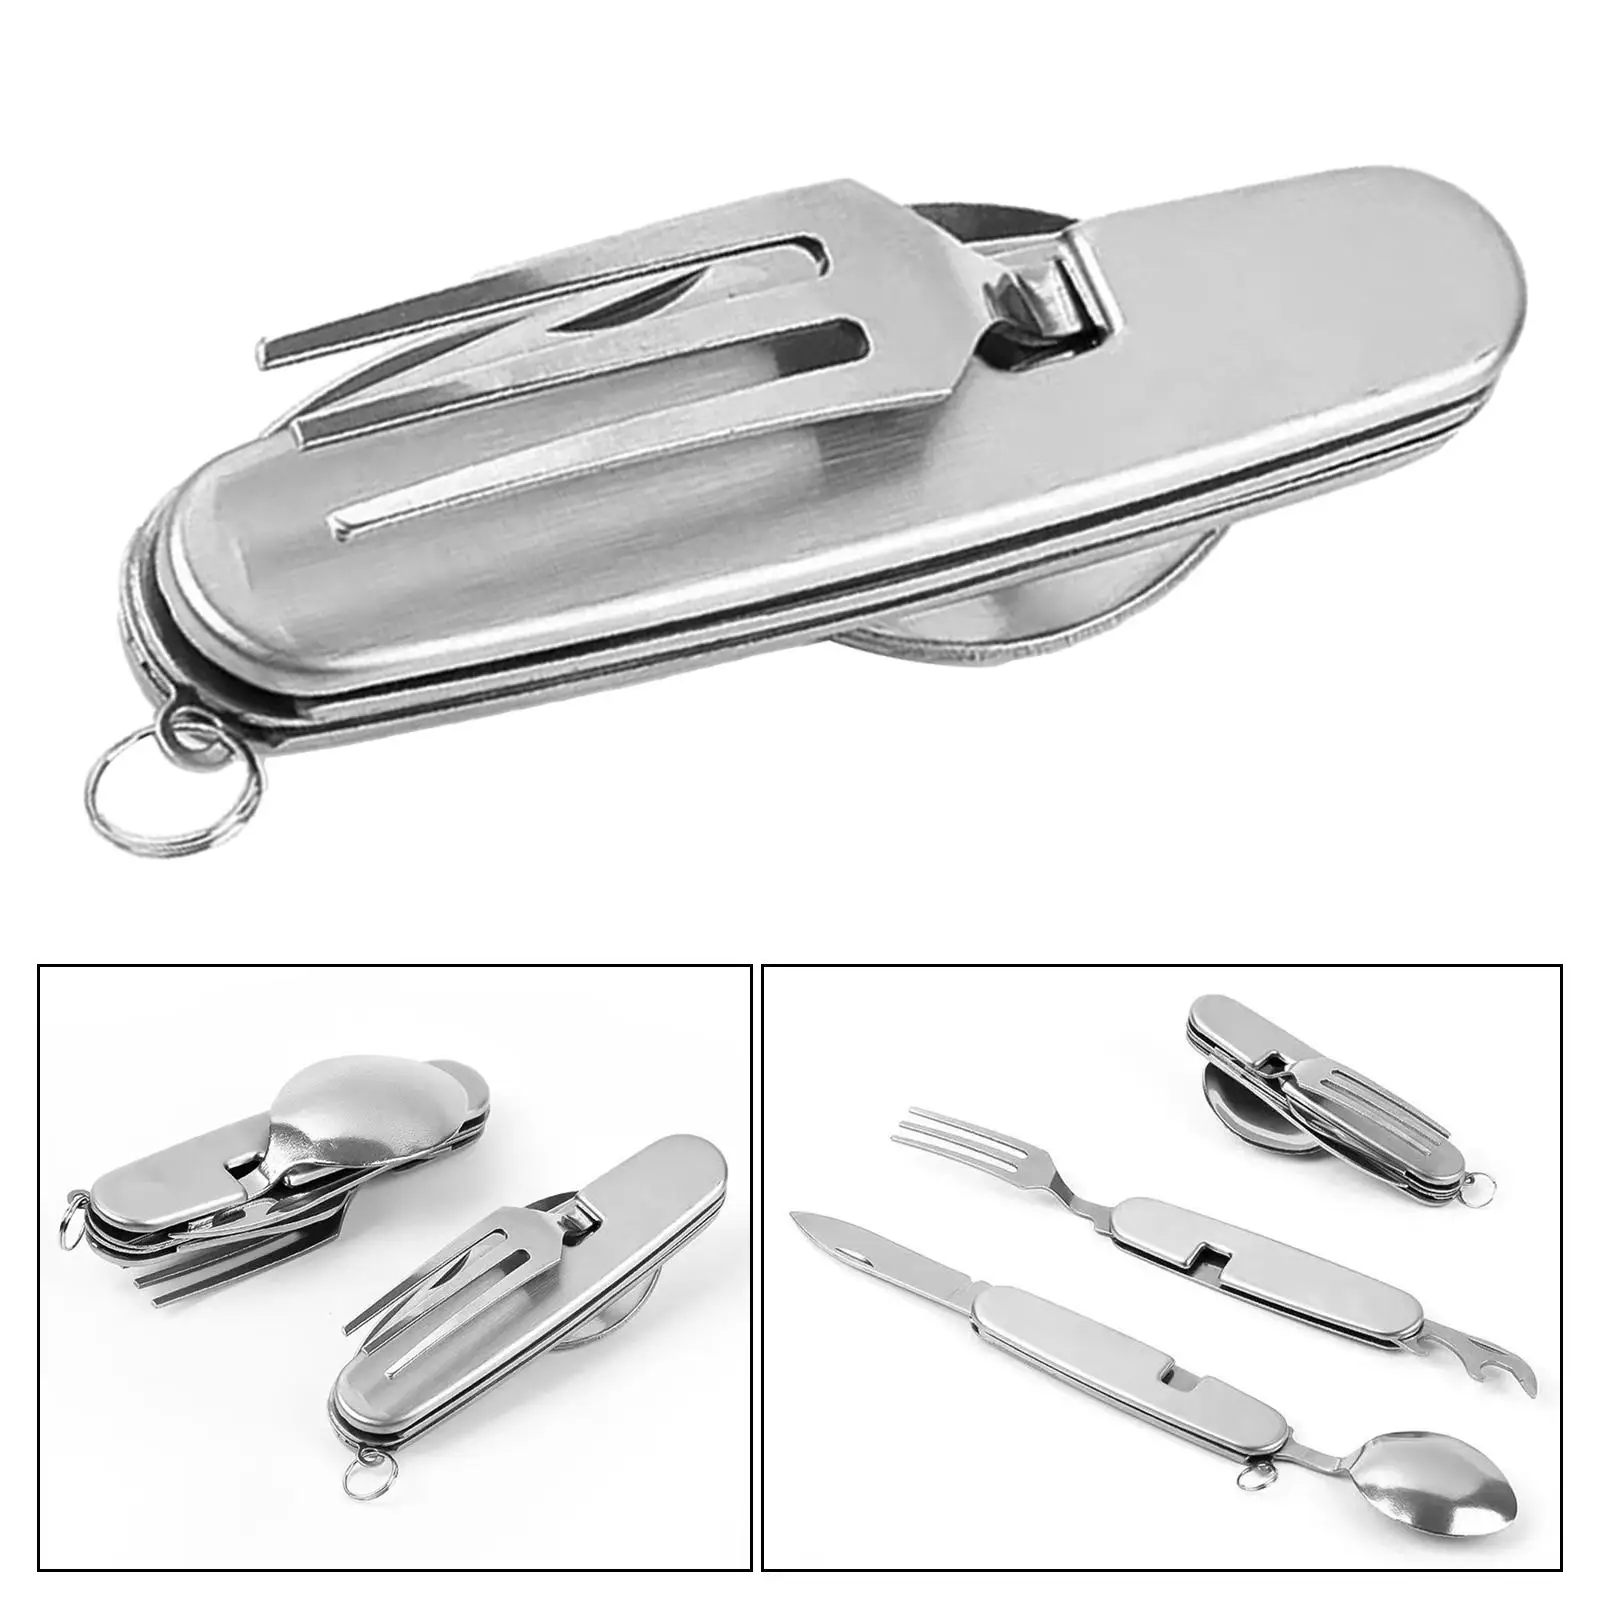 5 in 1 Camping Utensils Foldable Knife, Spoon, Fork, Bottle Opener, Can Opener Set, for Hiking Cooking BBQ Travel Outdoor